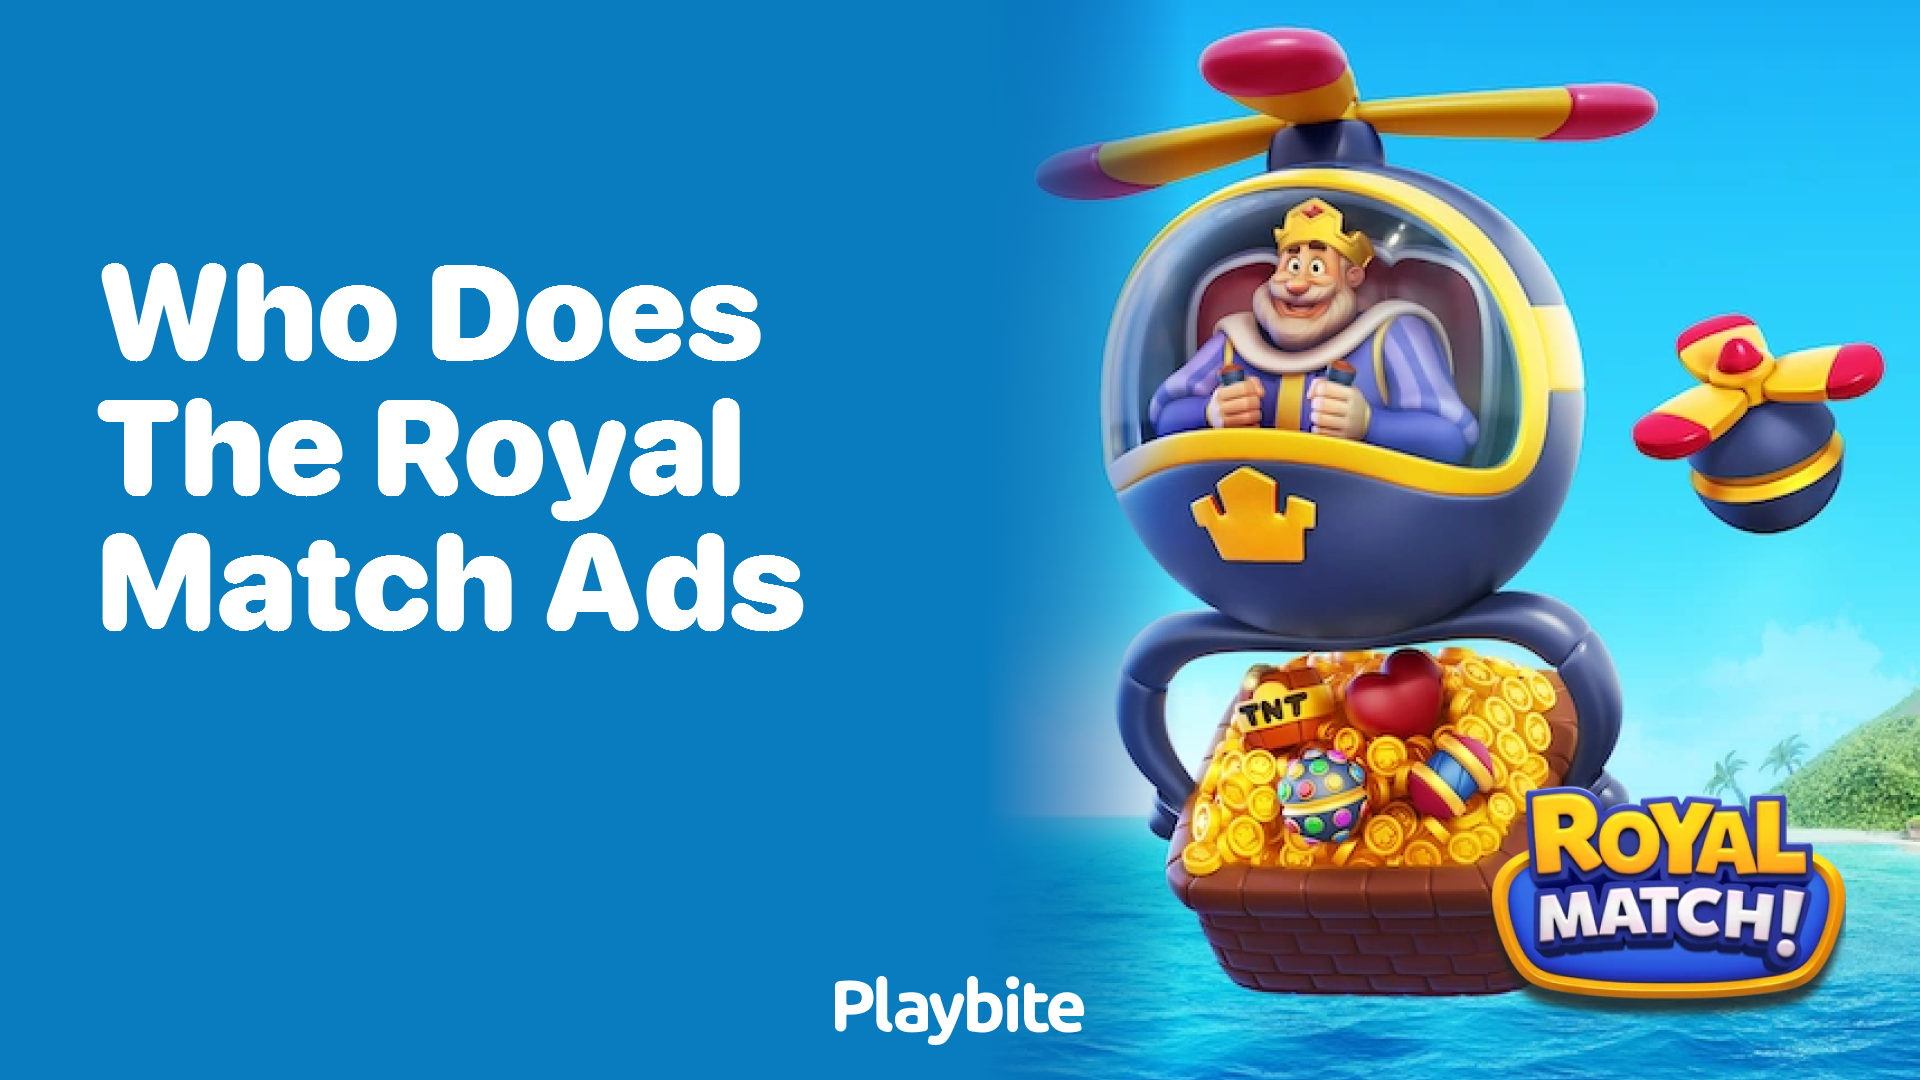 Who Creates the Advertisements for Royal Match?